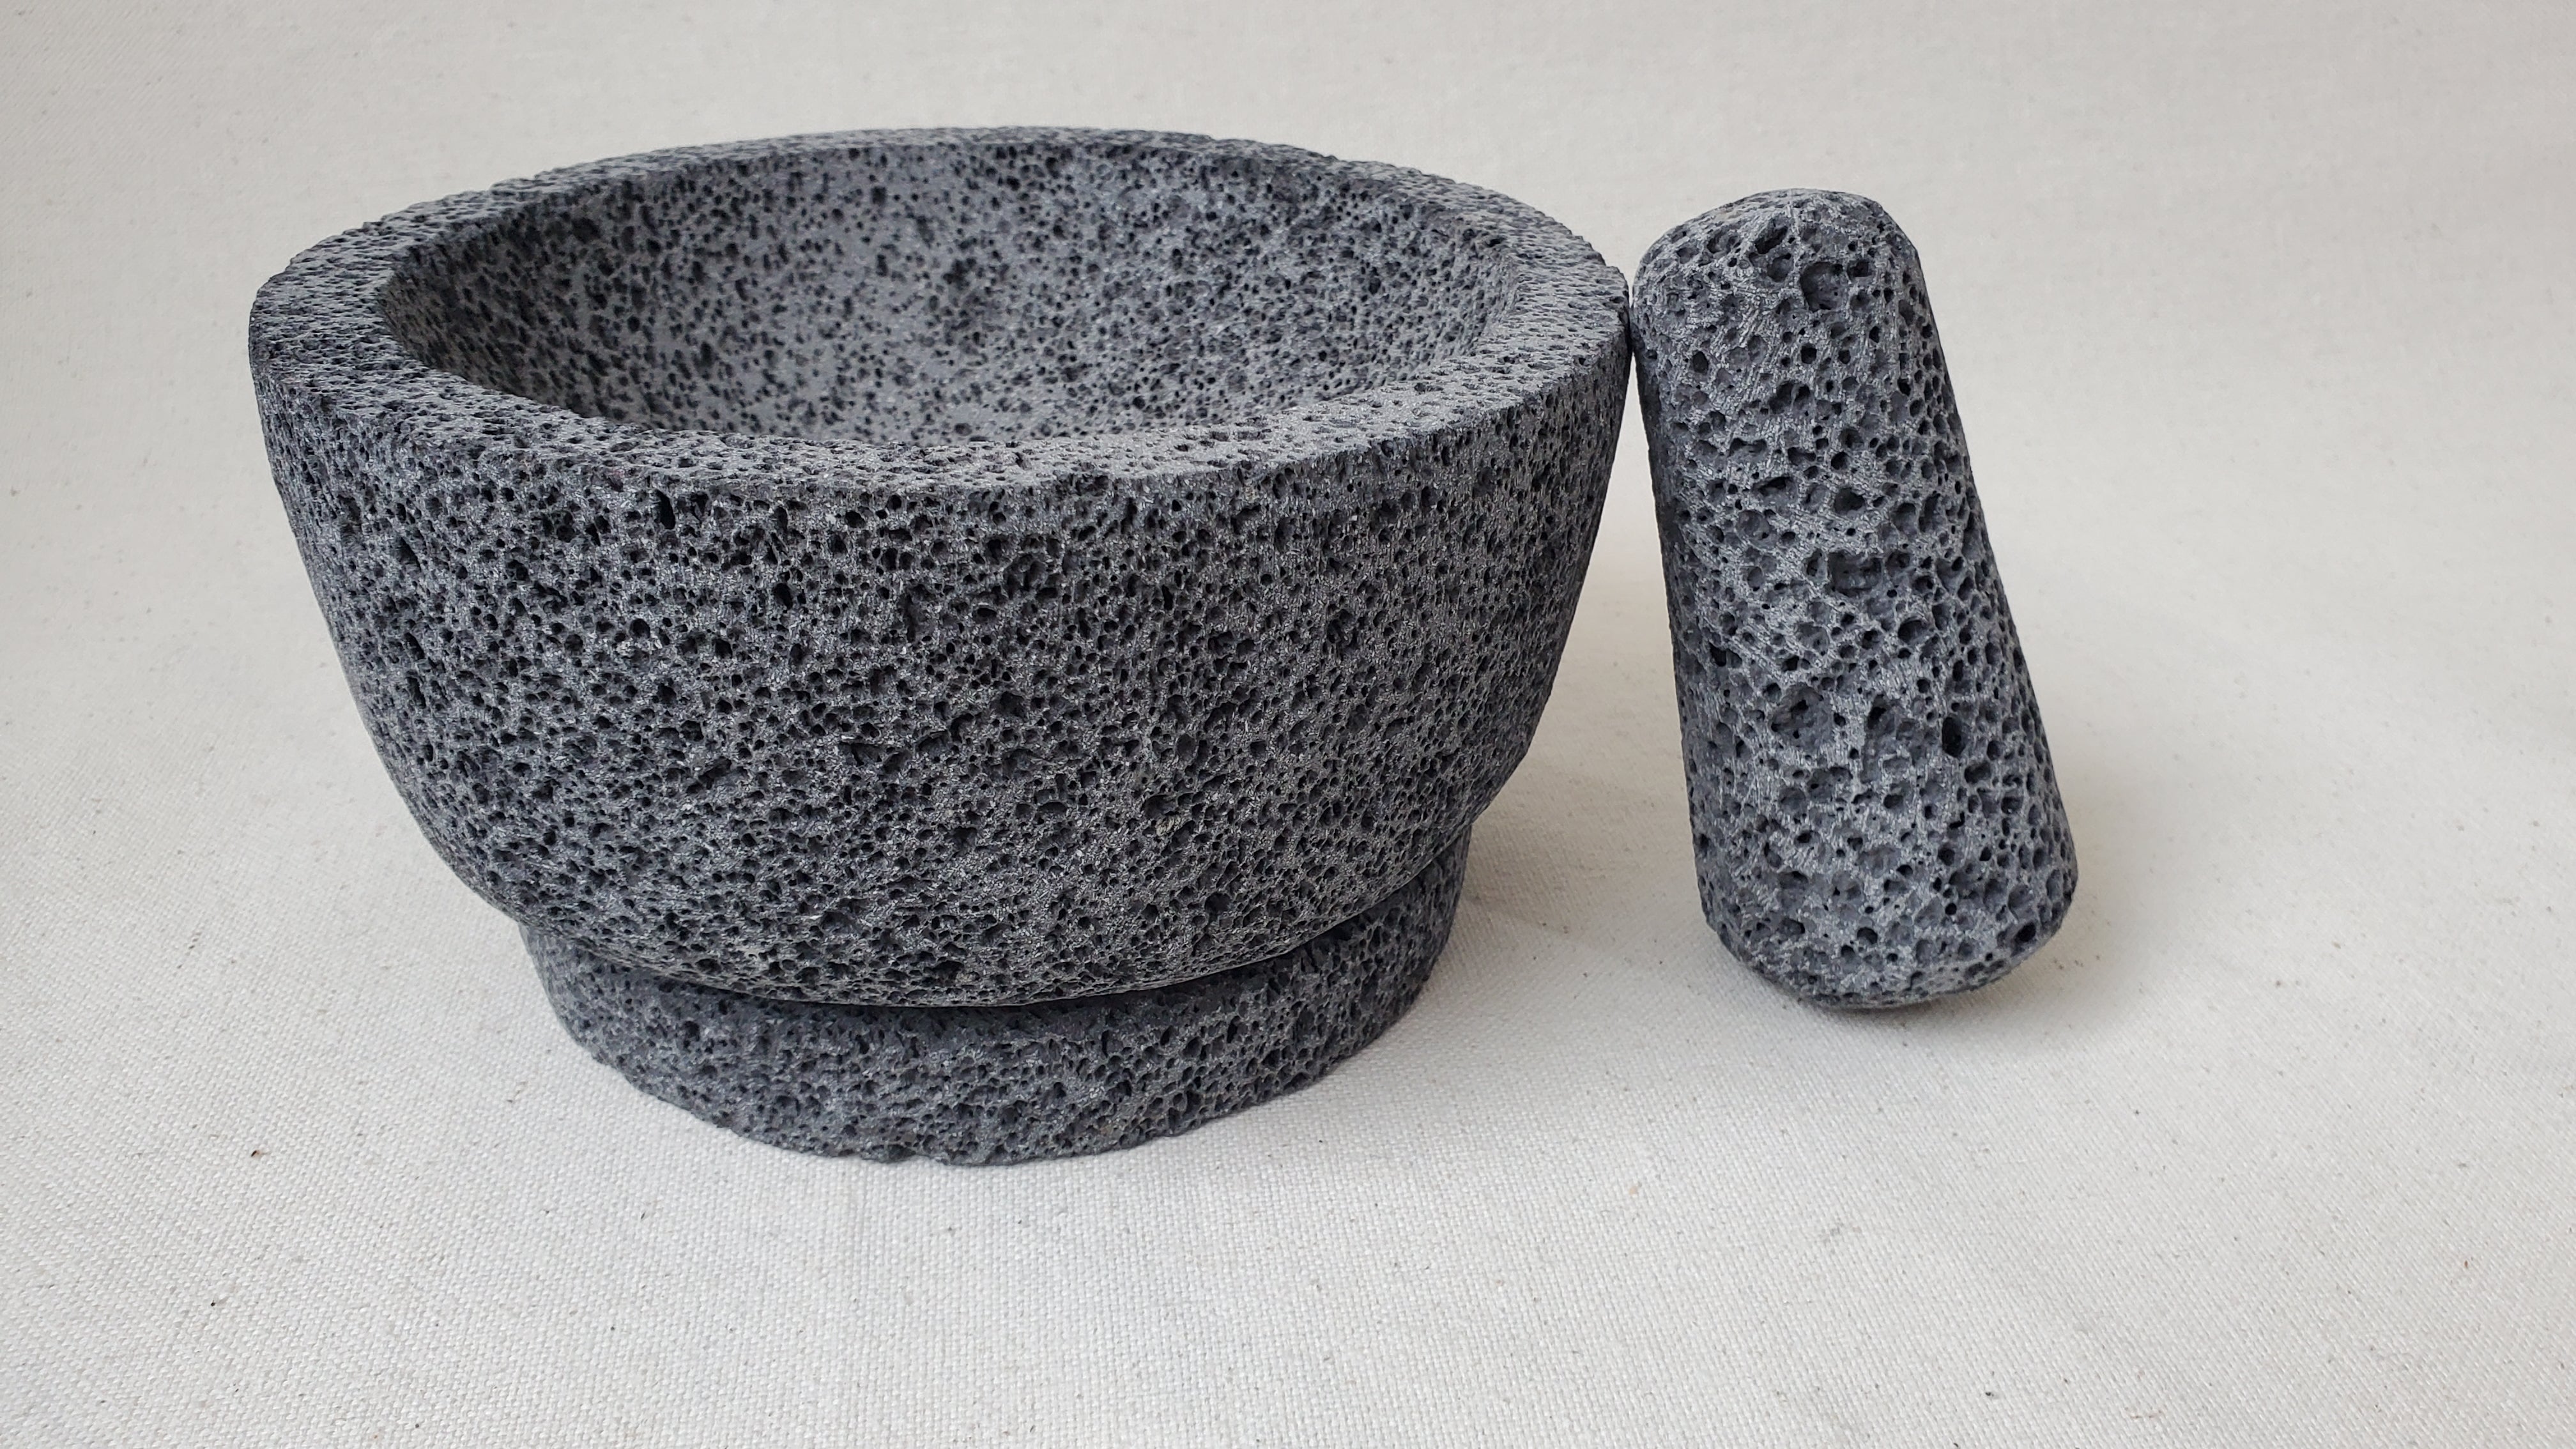 Authentic 8-inch Molcajete Pestle and Mortar Set. Made of pure basalt volcanic lava rock. Handmade in Mexico using traditional techniques. We hand finish, package, and ship from the USA. Buy now at www.felipeandgrace.com.